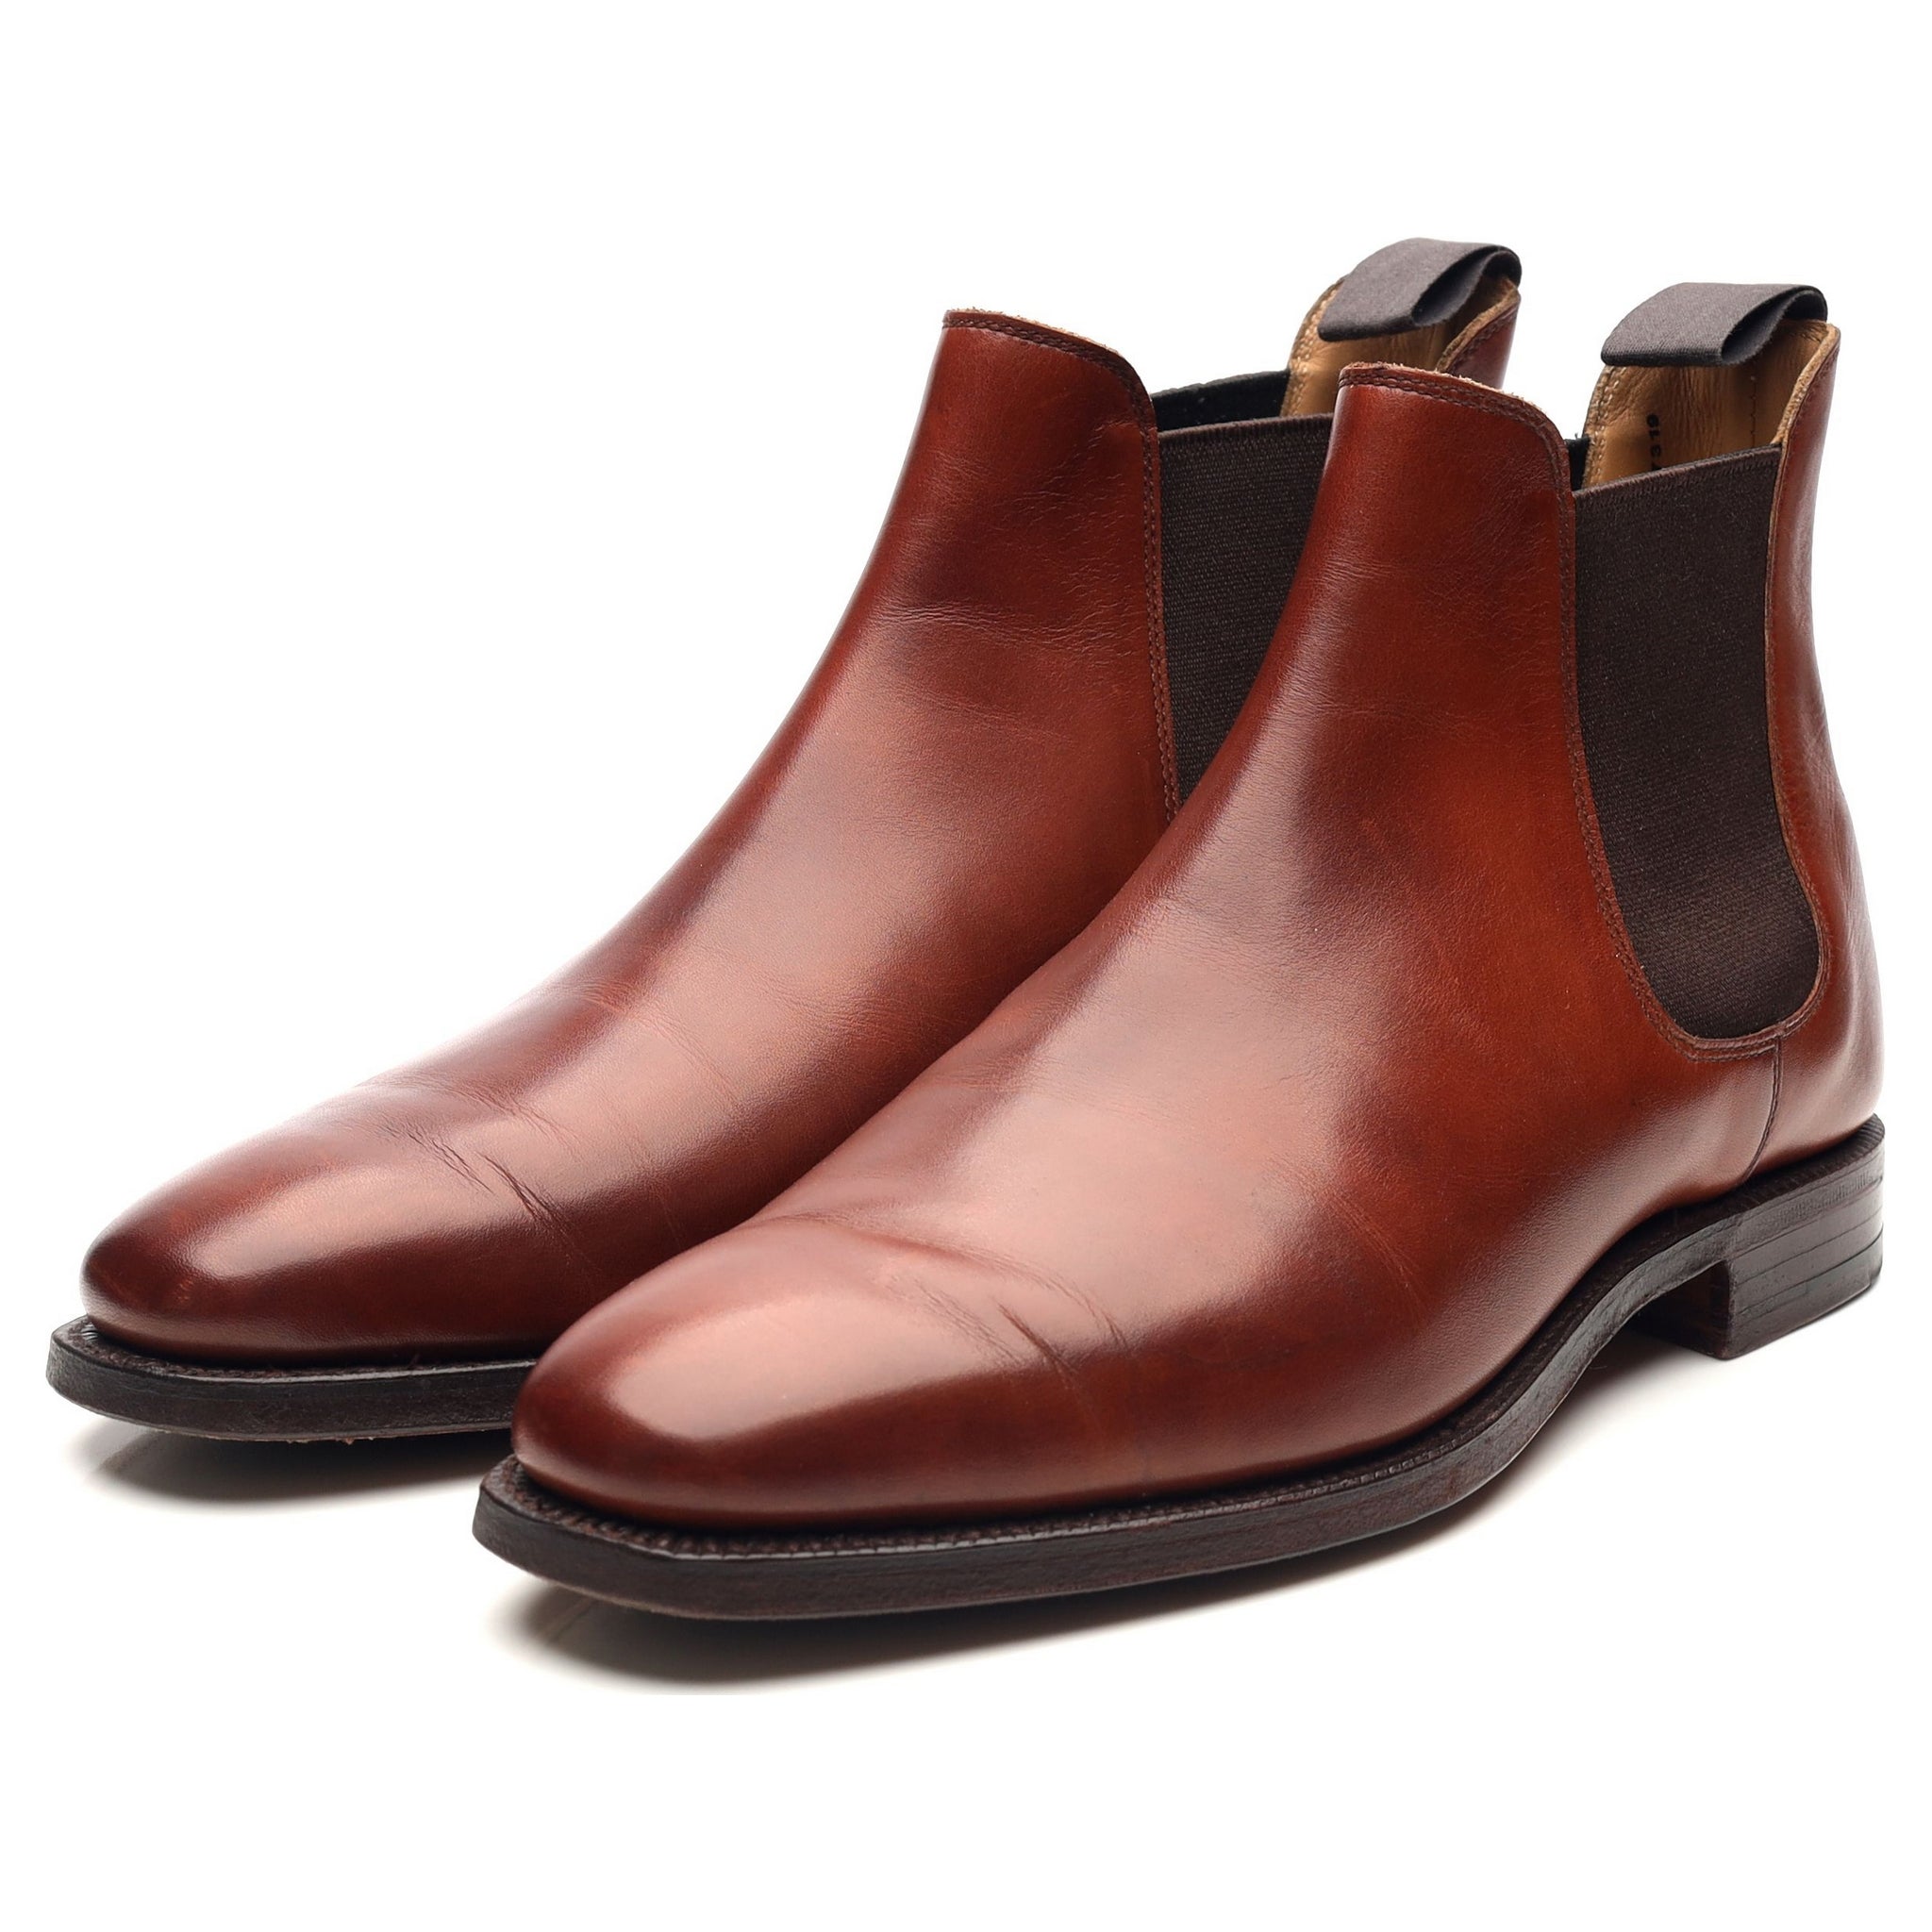 Chelsea' Tan Brown Leather Chelsea Boots UK E - Abbot's Shoes